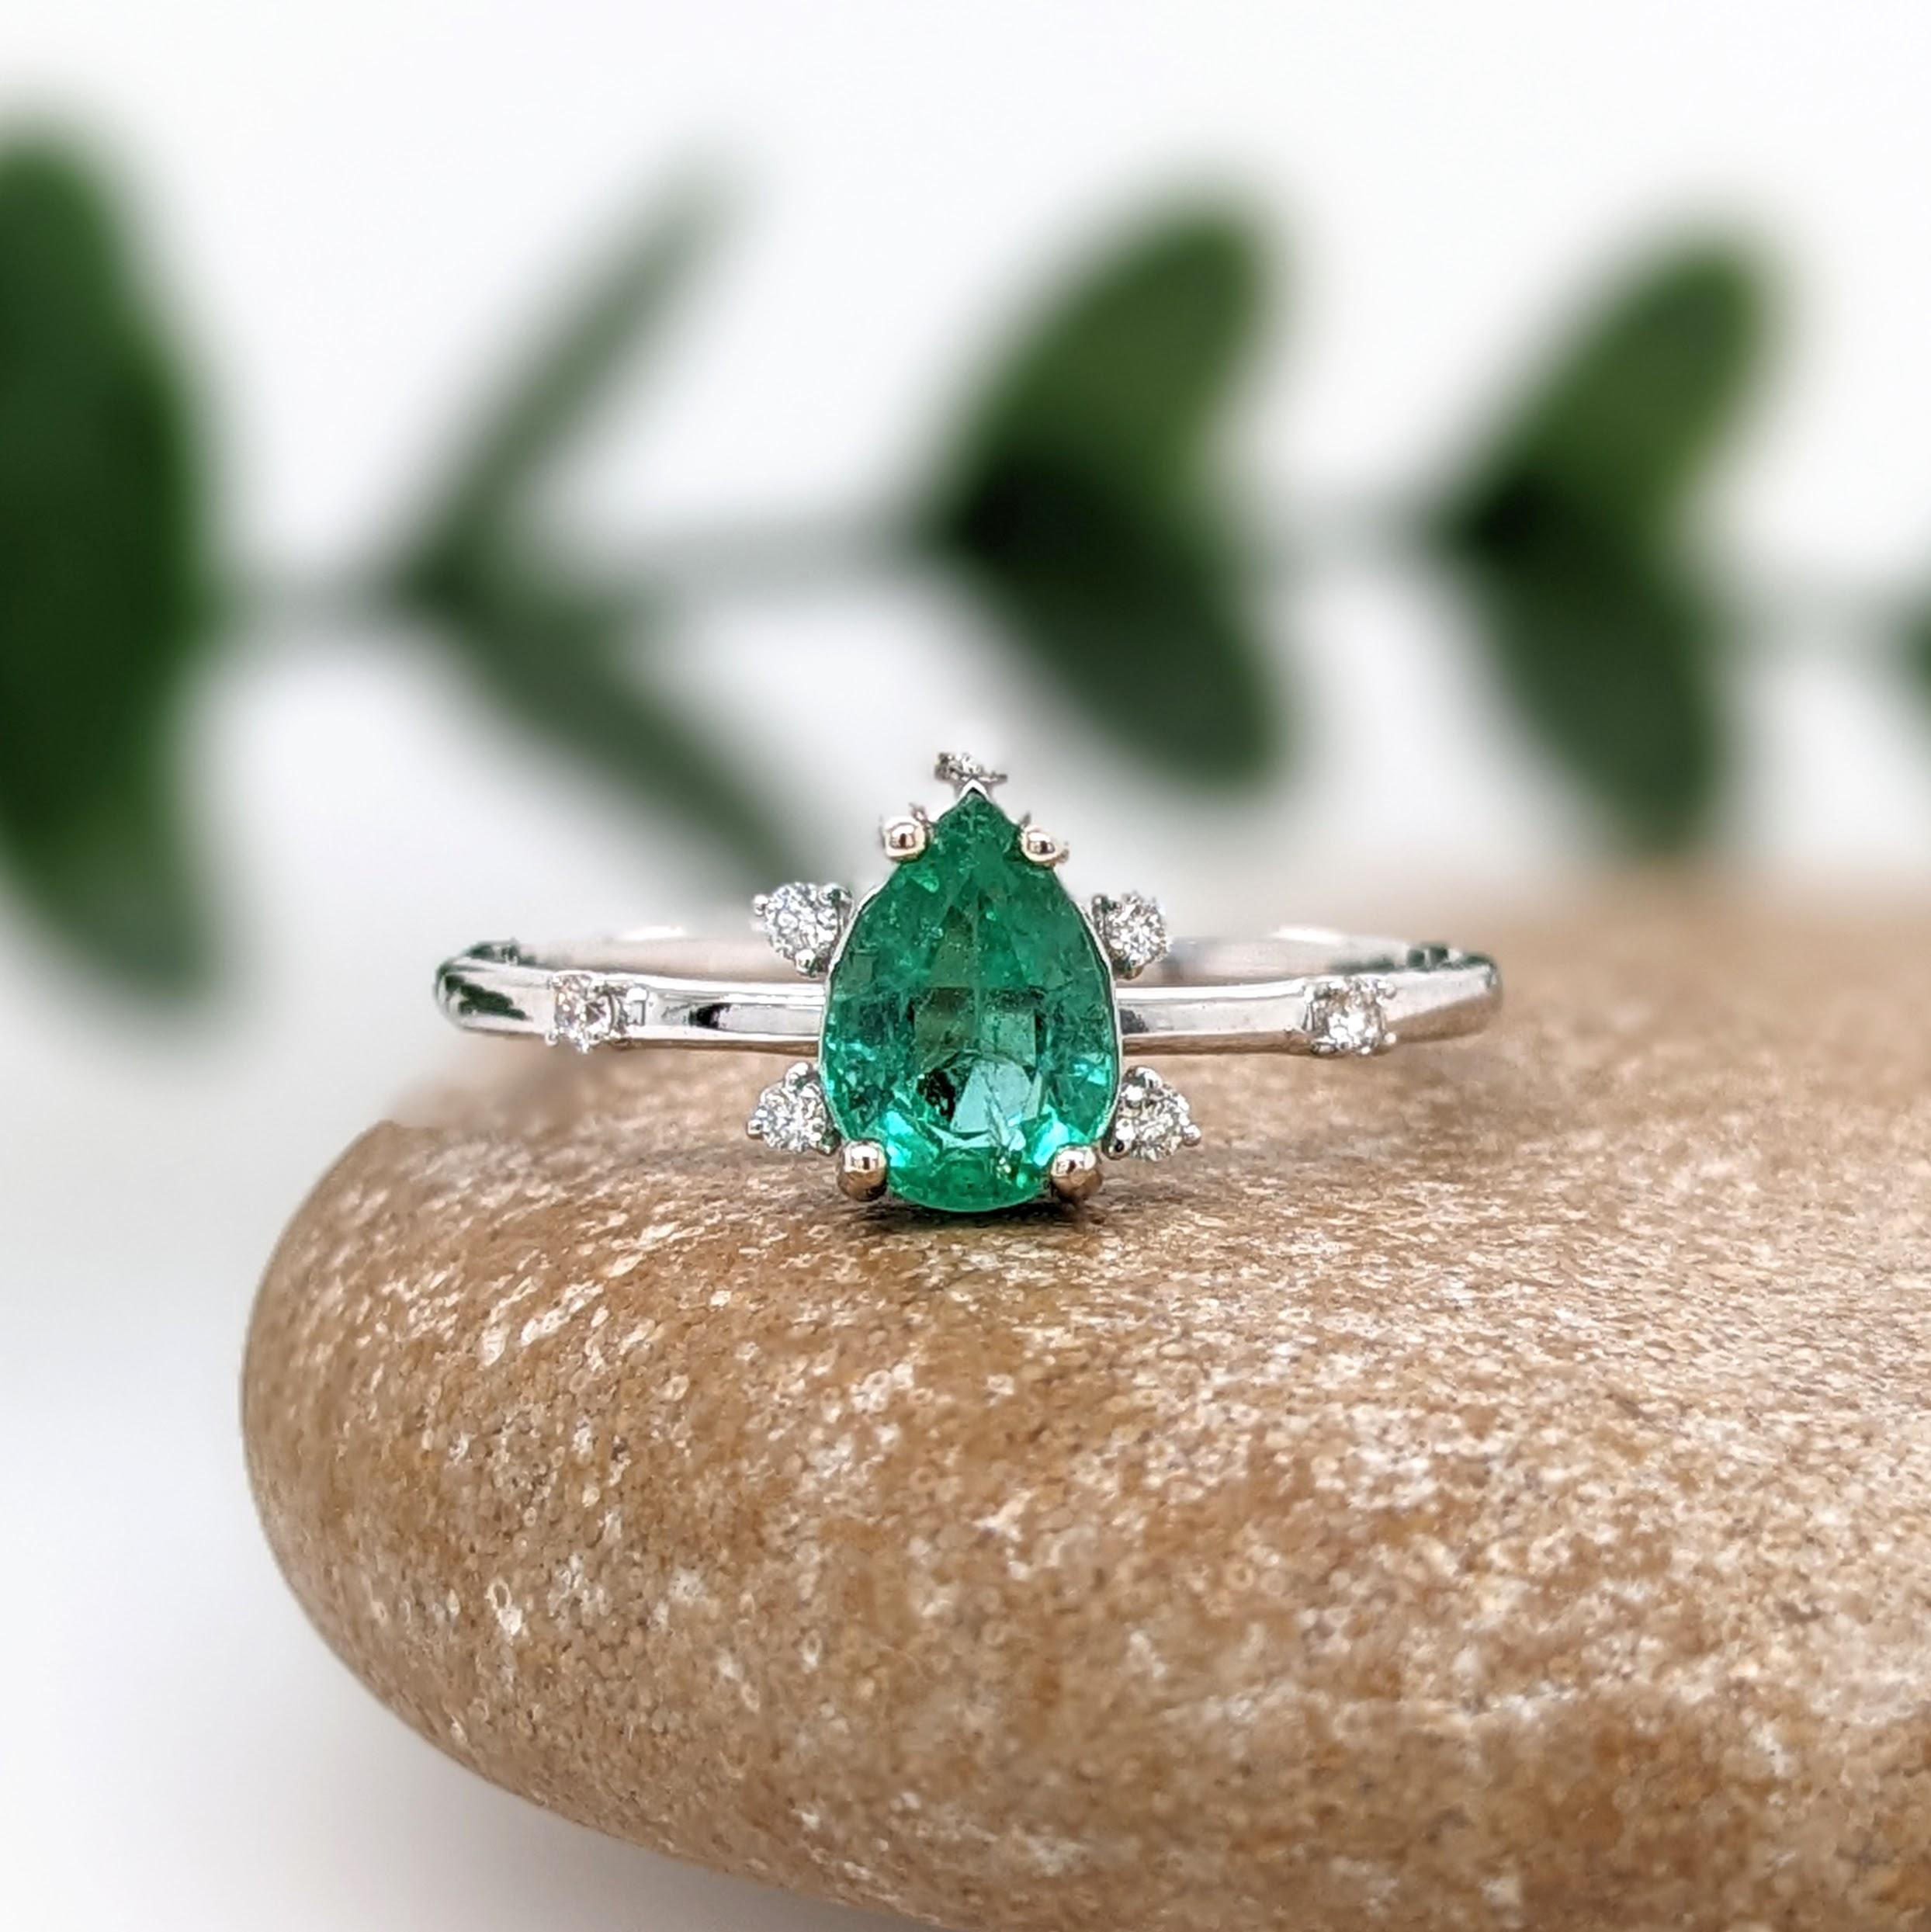 This ring features a cute pear shape 7x5mm emerald with natural diamond accents in a 14k white gold ring setting. This ring makes a beautiful may birthstone ring for your loved ones.

Specifications

Item Type: Ring
Centre Stone: Emerald
Treatment: